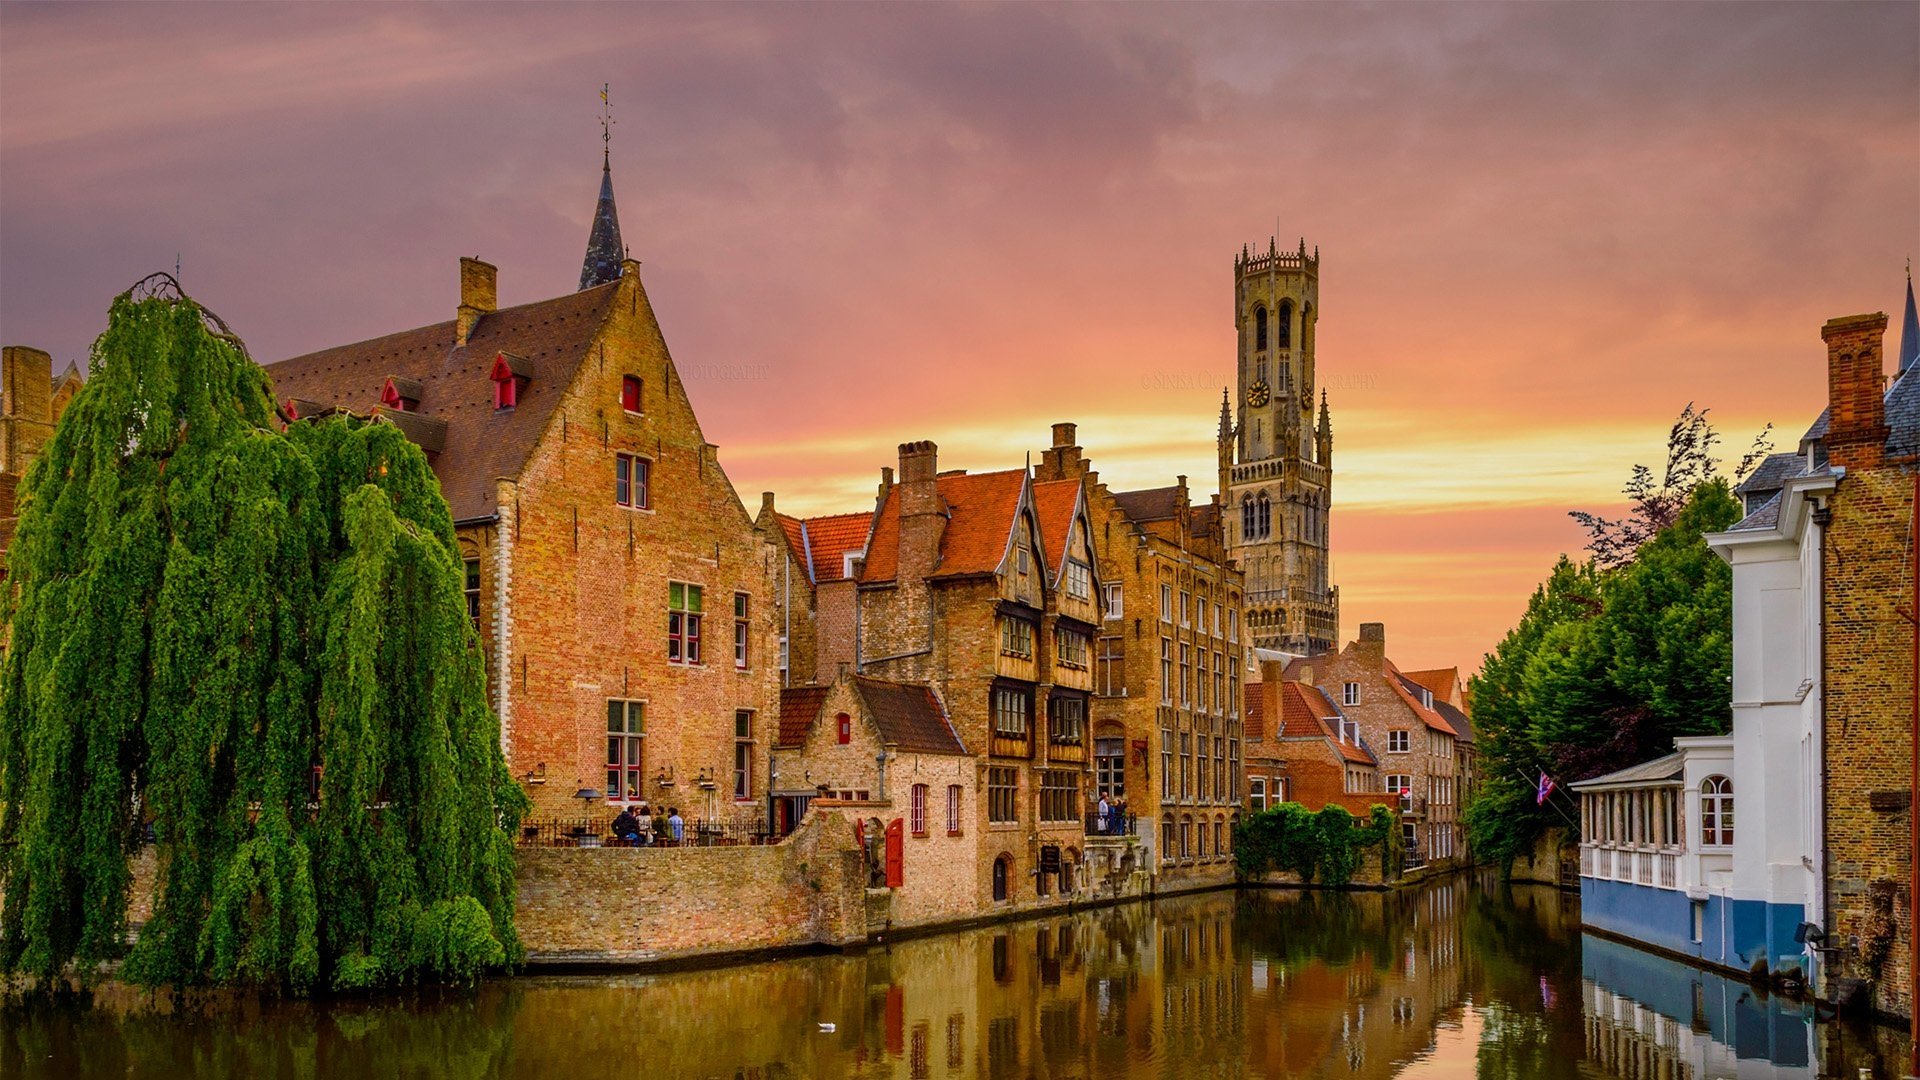 Buildings and Church along a Canal in Bruges Belgium HD Wallpaper 1920x1080